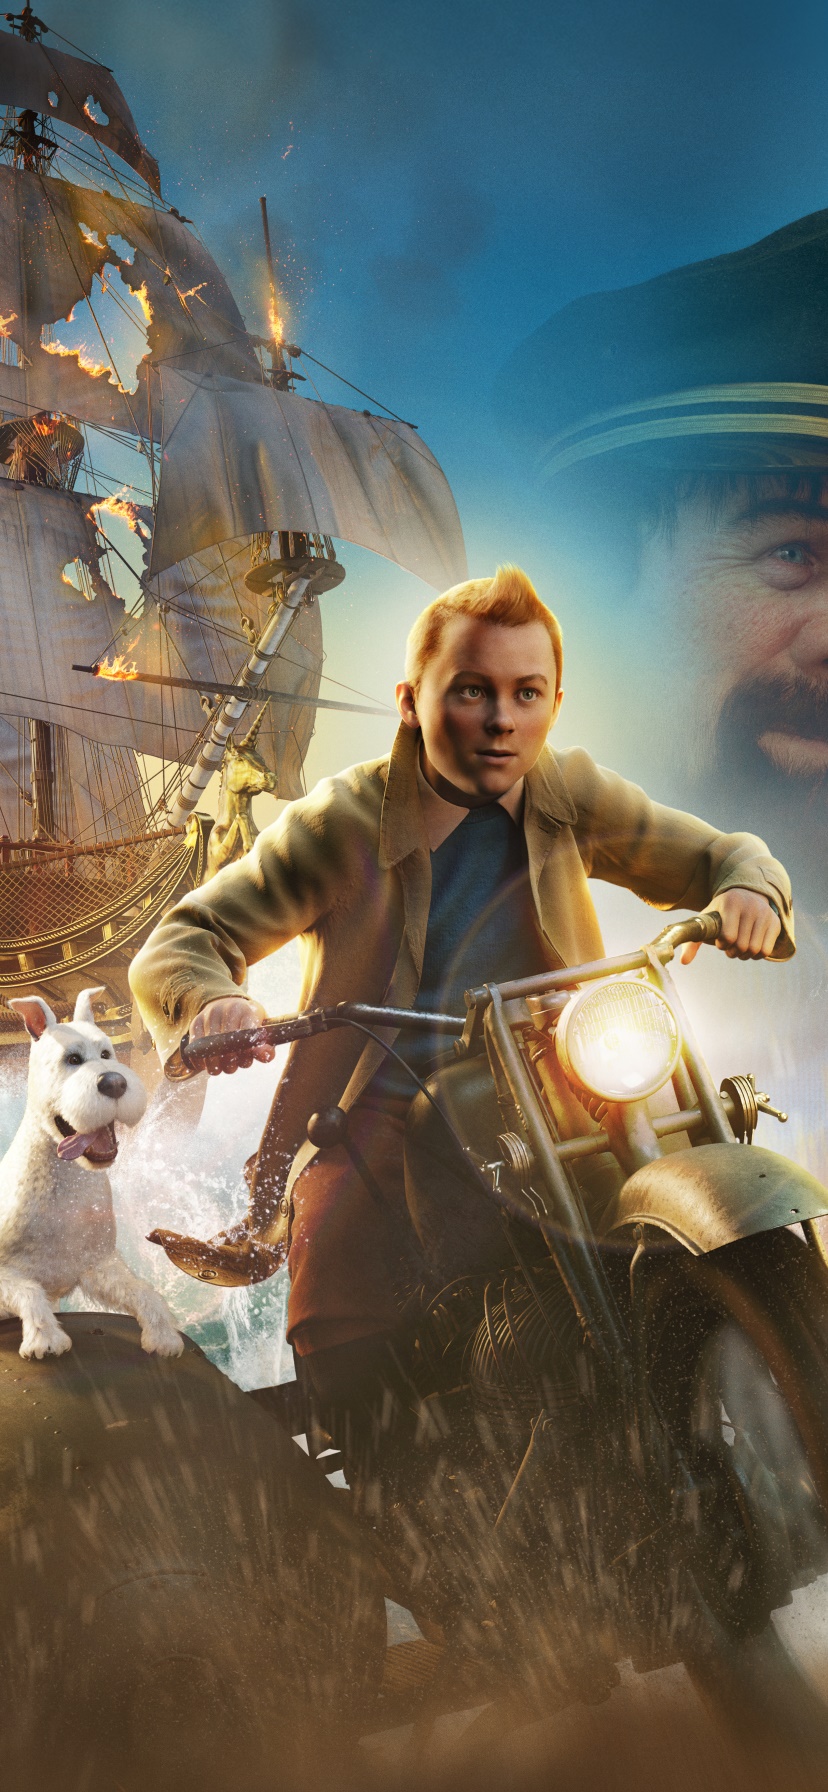 The adventures of tintin phone wallpaper p k k full hd wallpapers backgrounds free download wallpaper crafter